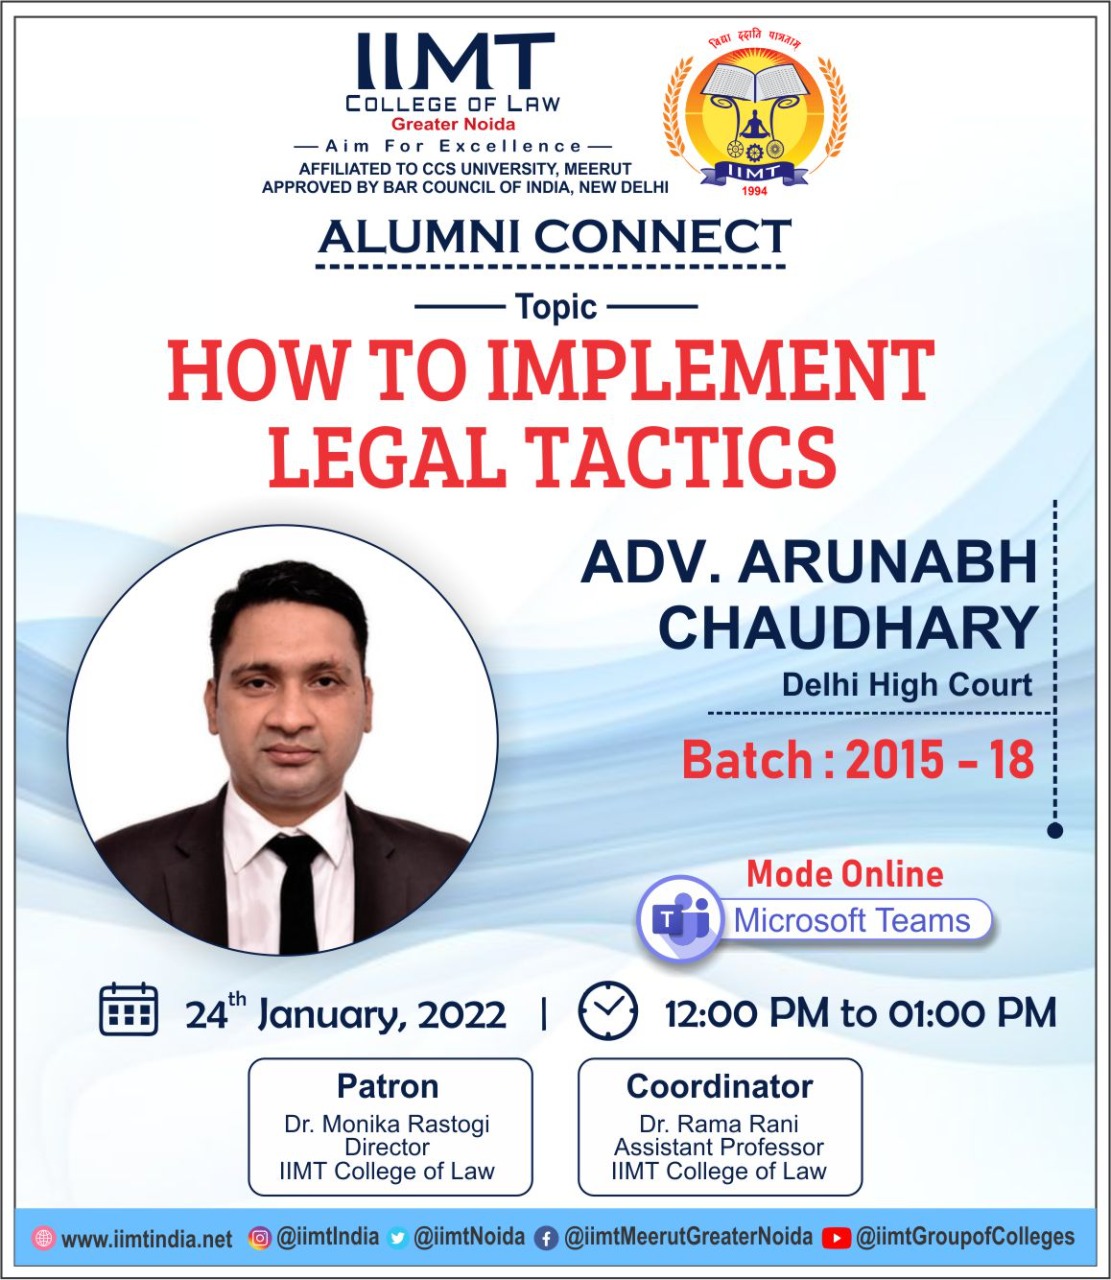 IIMT College of Law organizing an ALUMNI CONNECT  on HOW TO IMPLEMENT LEGAL TACTICS